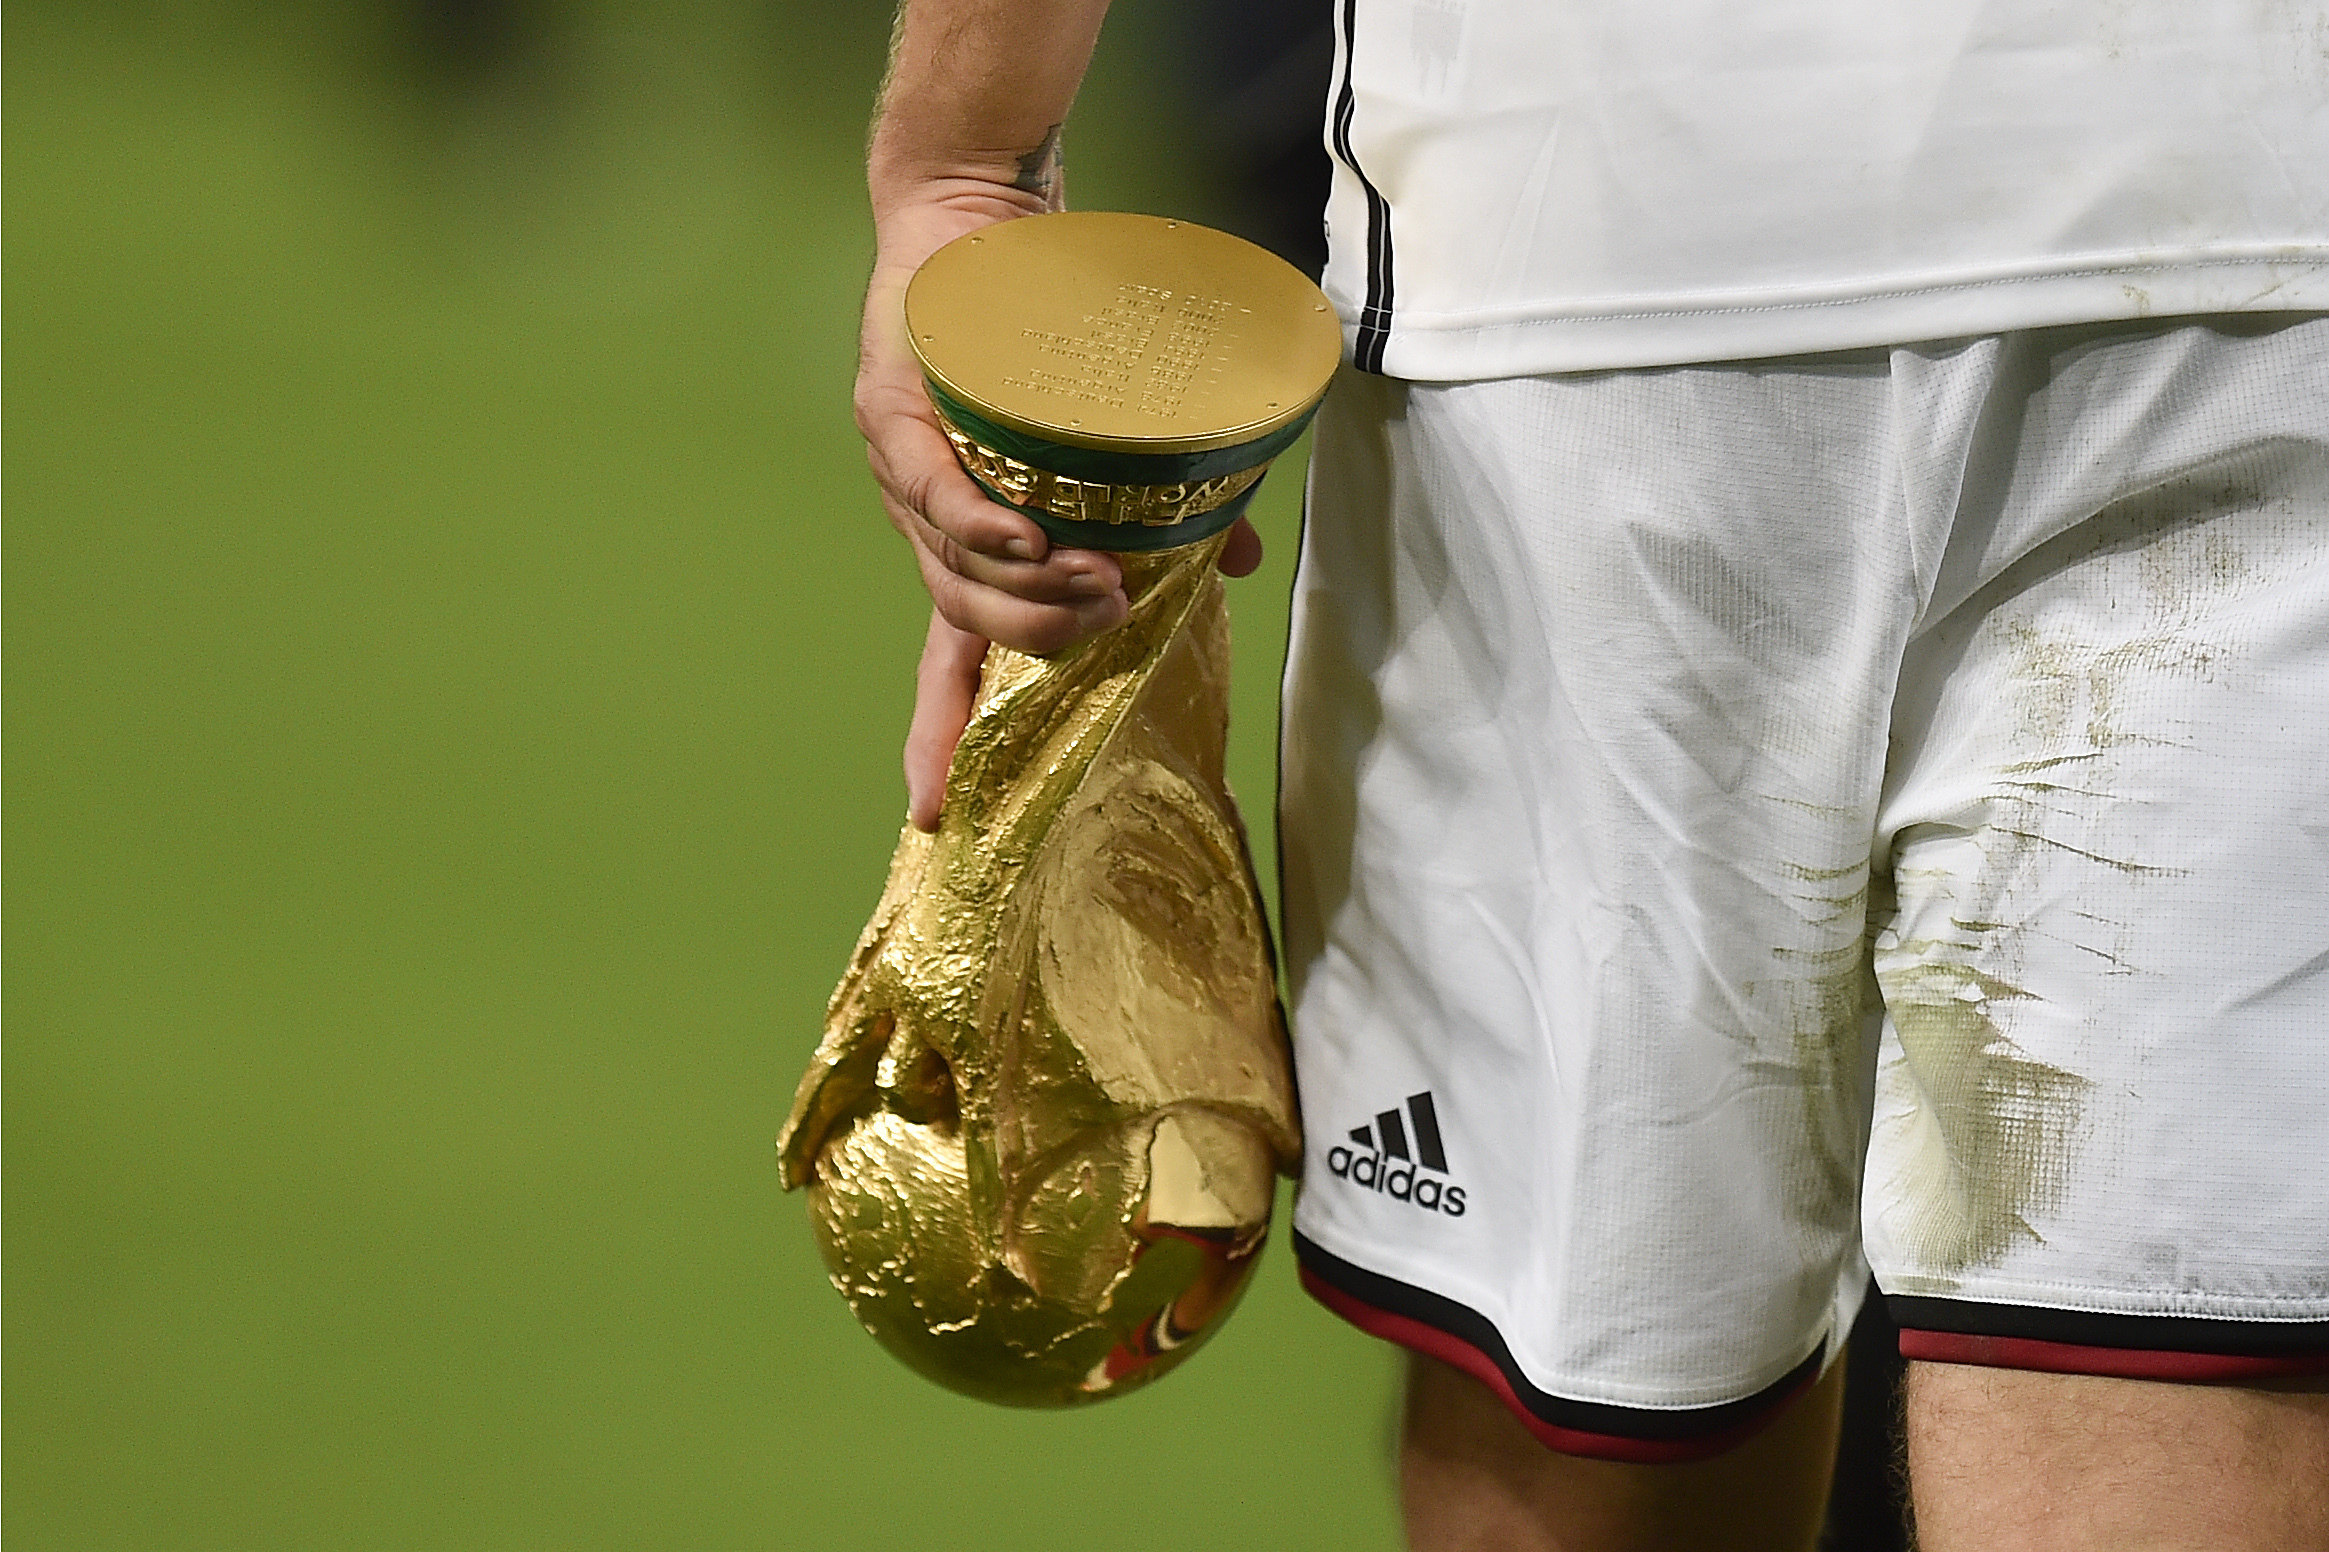 Germany’s Lukas Podolski  holds the World Cup trophy and wearing Adidas at the 2014 tournament. Photo: AP